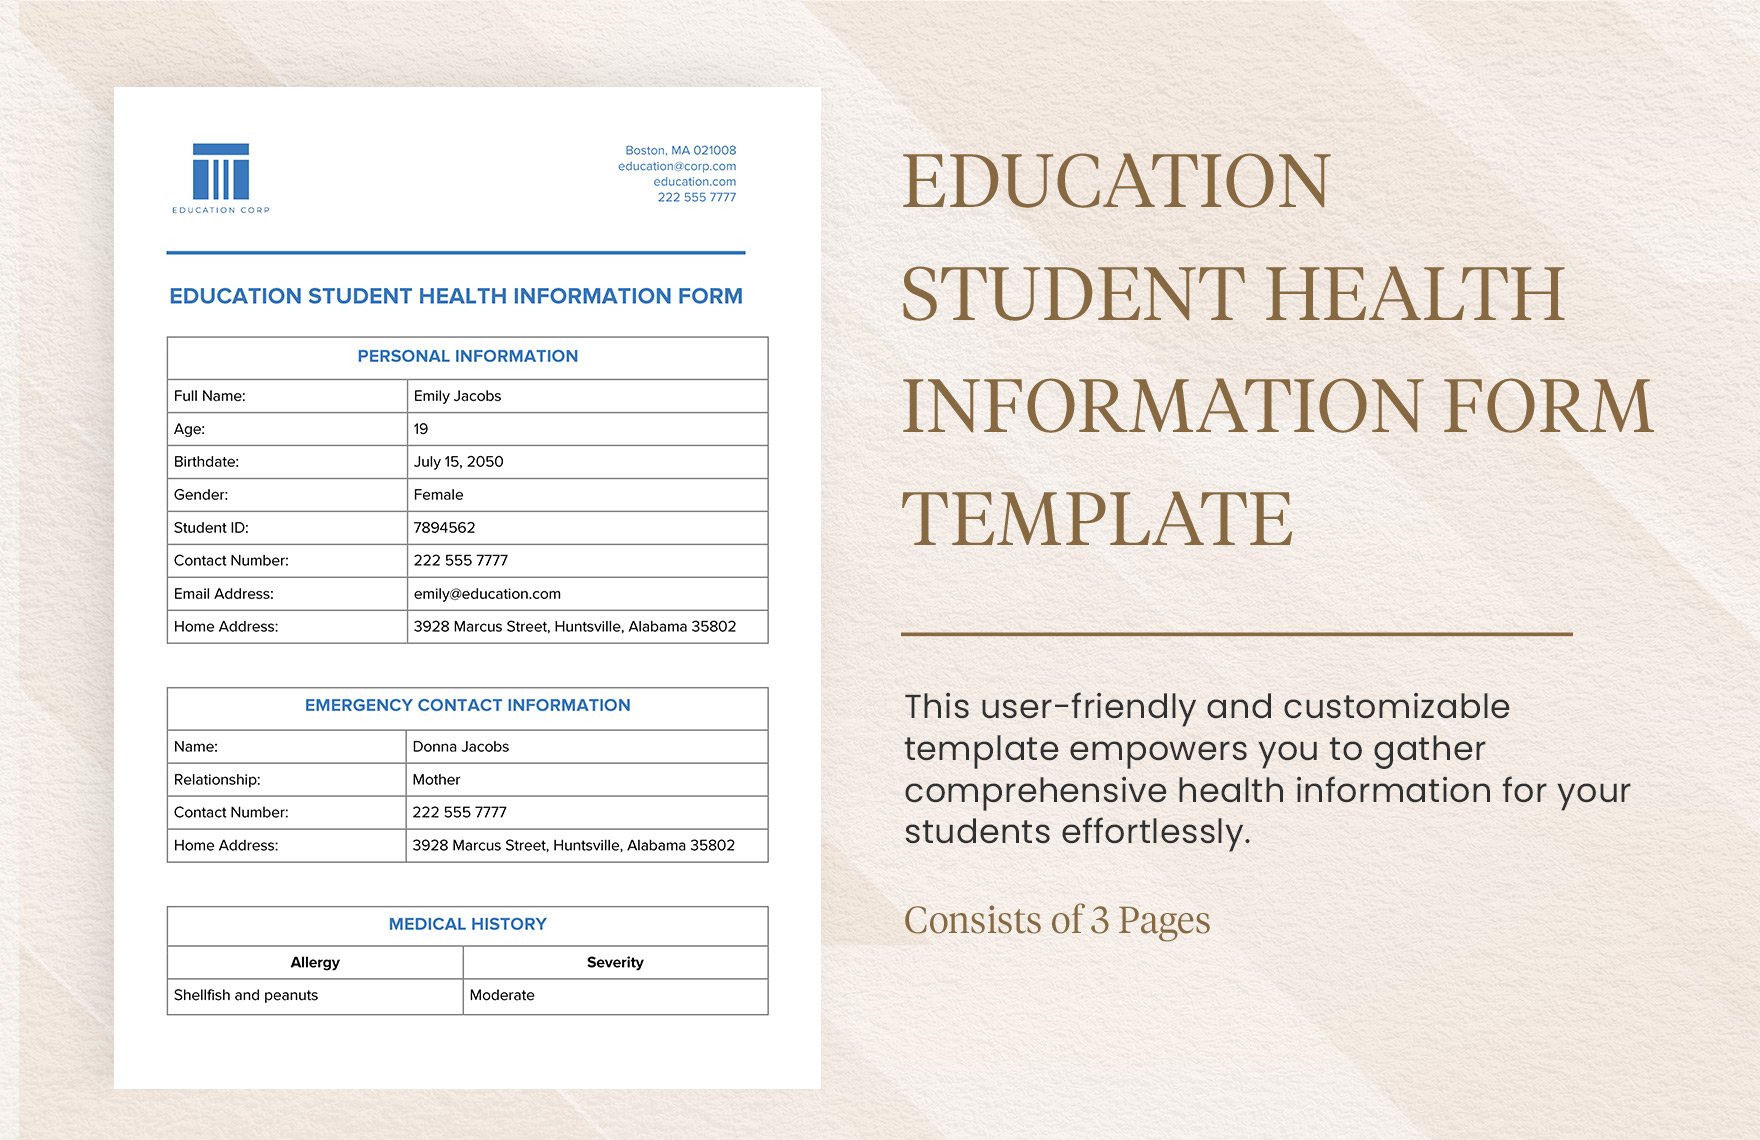 Education Student Health Information Form Template